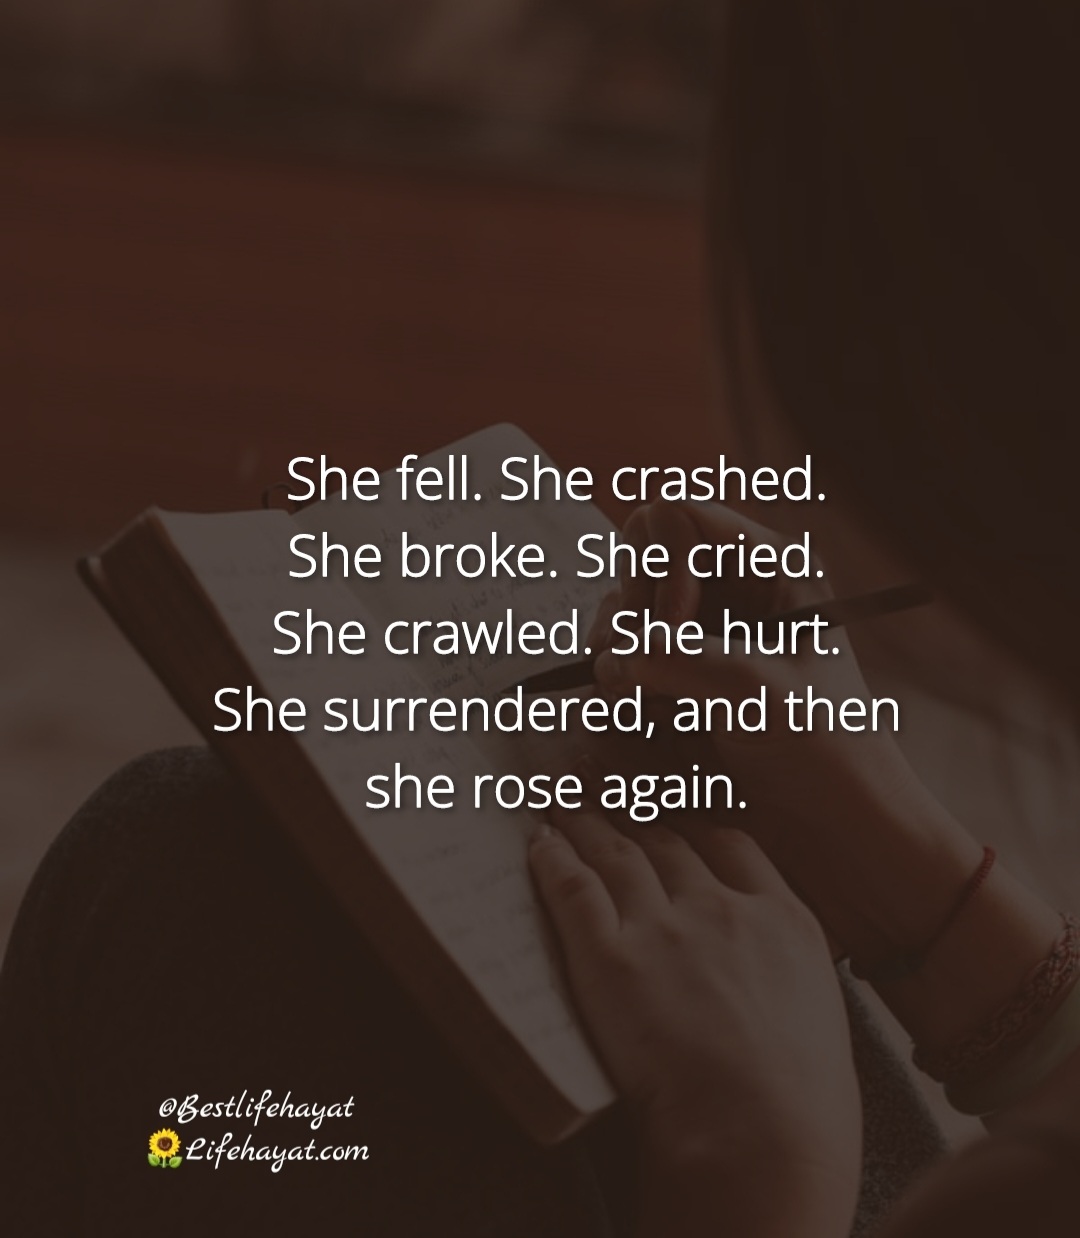 Then-she-rose-again